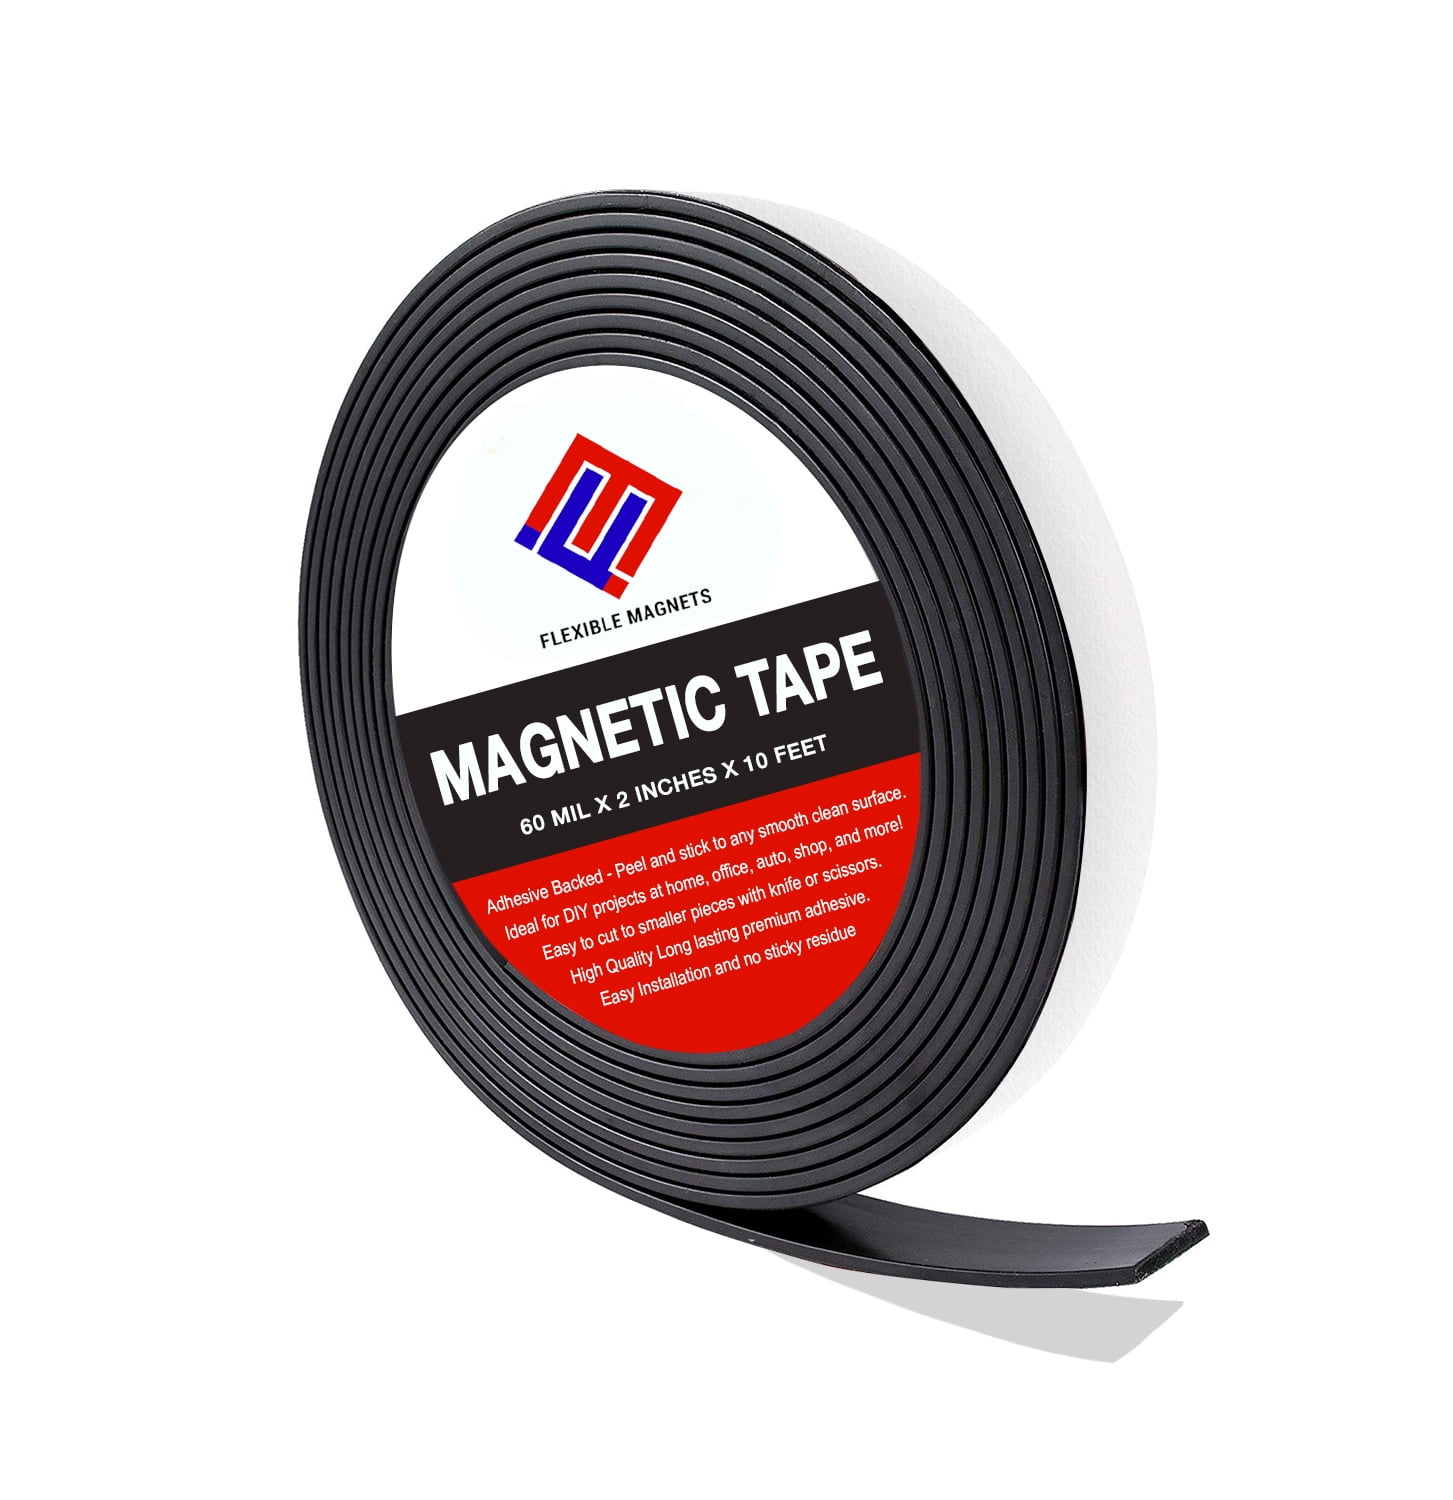 2-inch x 10-feet x 1/16 thick Adhesive Magnetic Strip VERY STRONG! Flexible Magnet Tape 